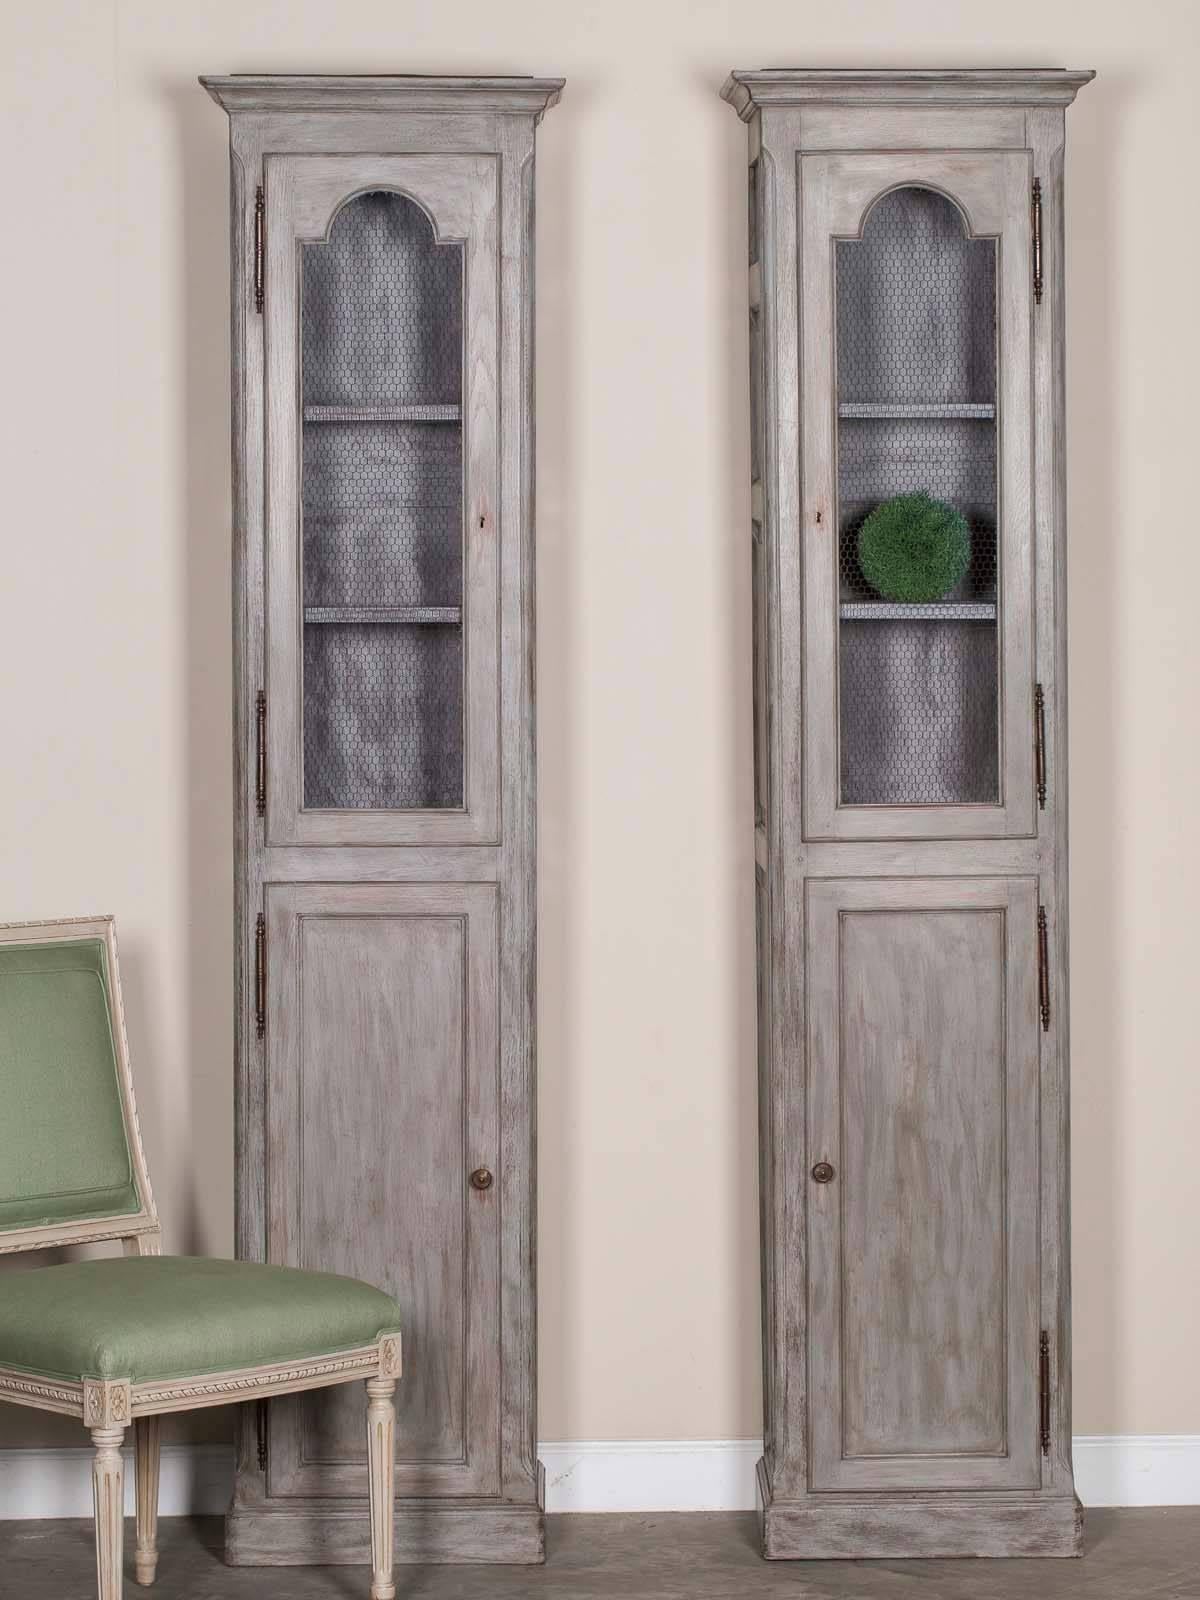 This pair of antique French painted oak cabinets, circa 1875, feature an upper and lower cabinet door with the upper door fitted with wire mesh. Please notice the architectural presence of these bibliotheque display cabinets as they Stand upon a